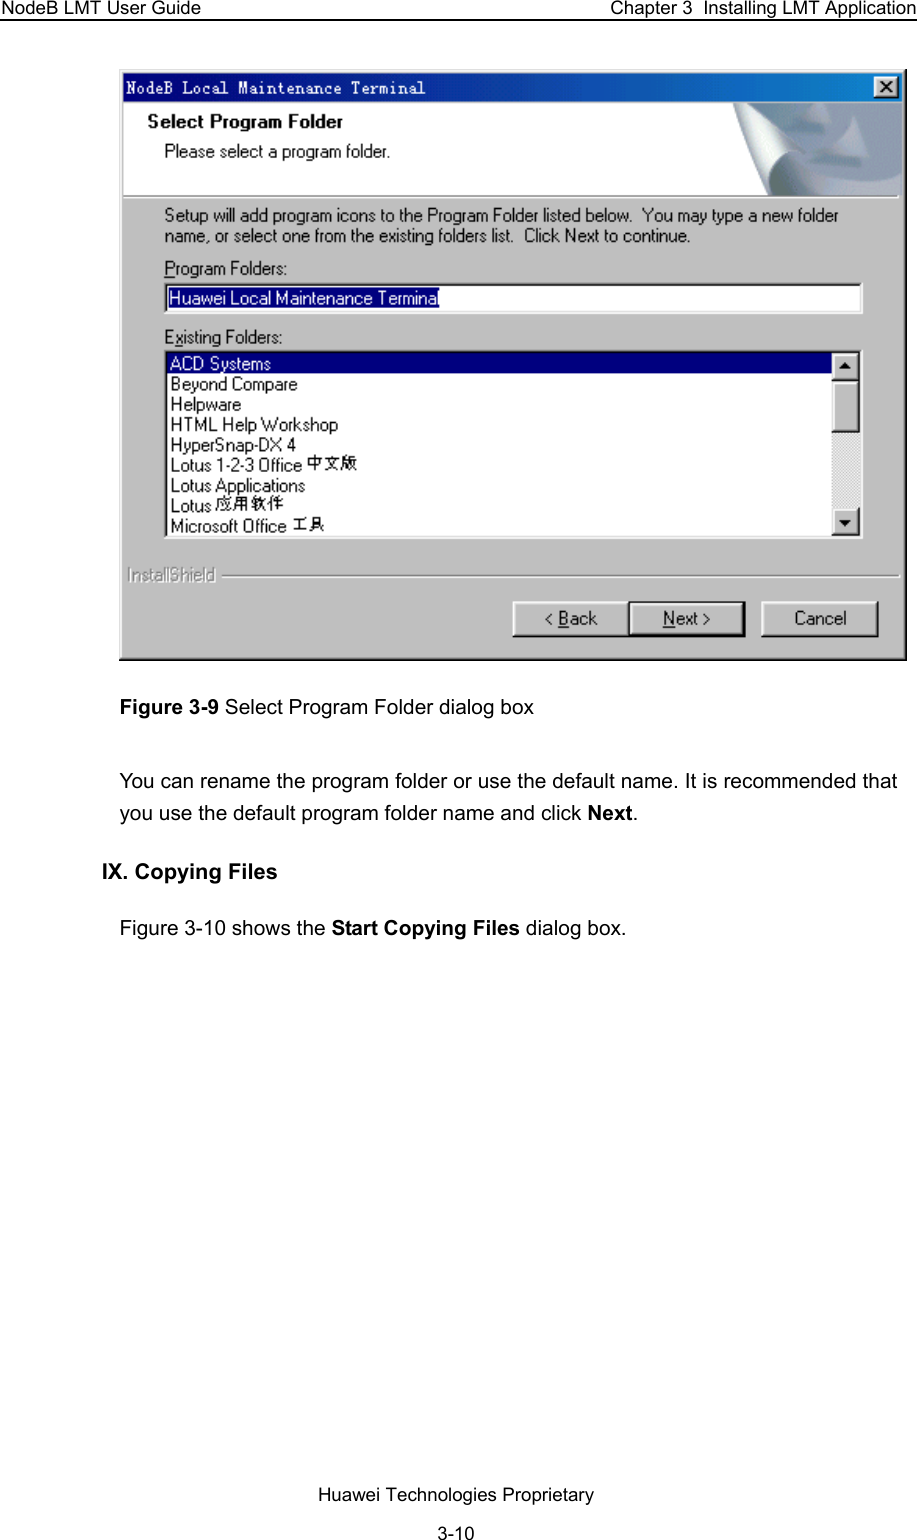 NodeB LMT User Guide  Chapter 3  Installing LMT Application  Figure 3-9 Select Program Folder dialog box You can rename the program folder or use the default name. It is recommended that you use the default program folder name and click Next.  IX. Copying Files  Figure 3-10 shows the Start Copying Files dialog box.  Huawei Technologies Proprietary 3-10 